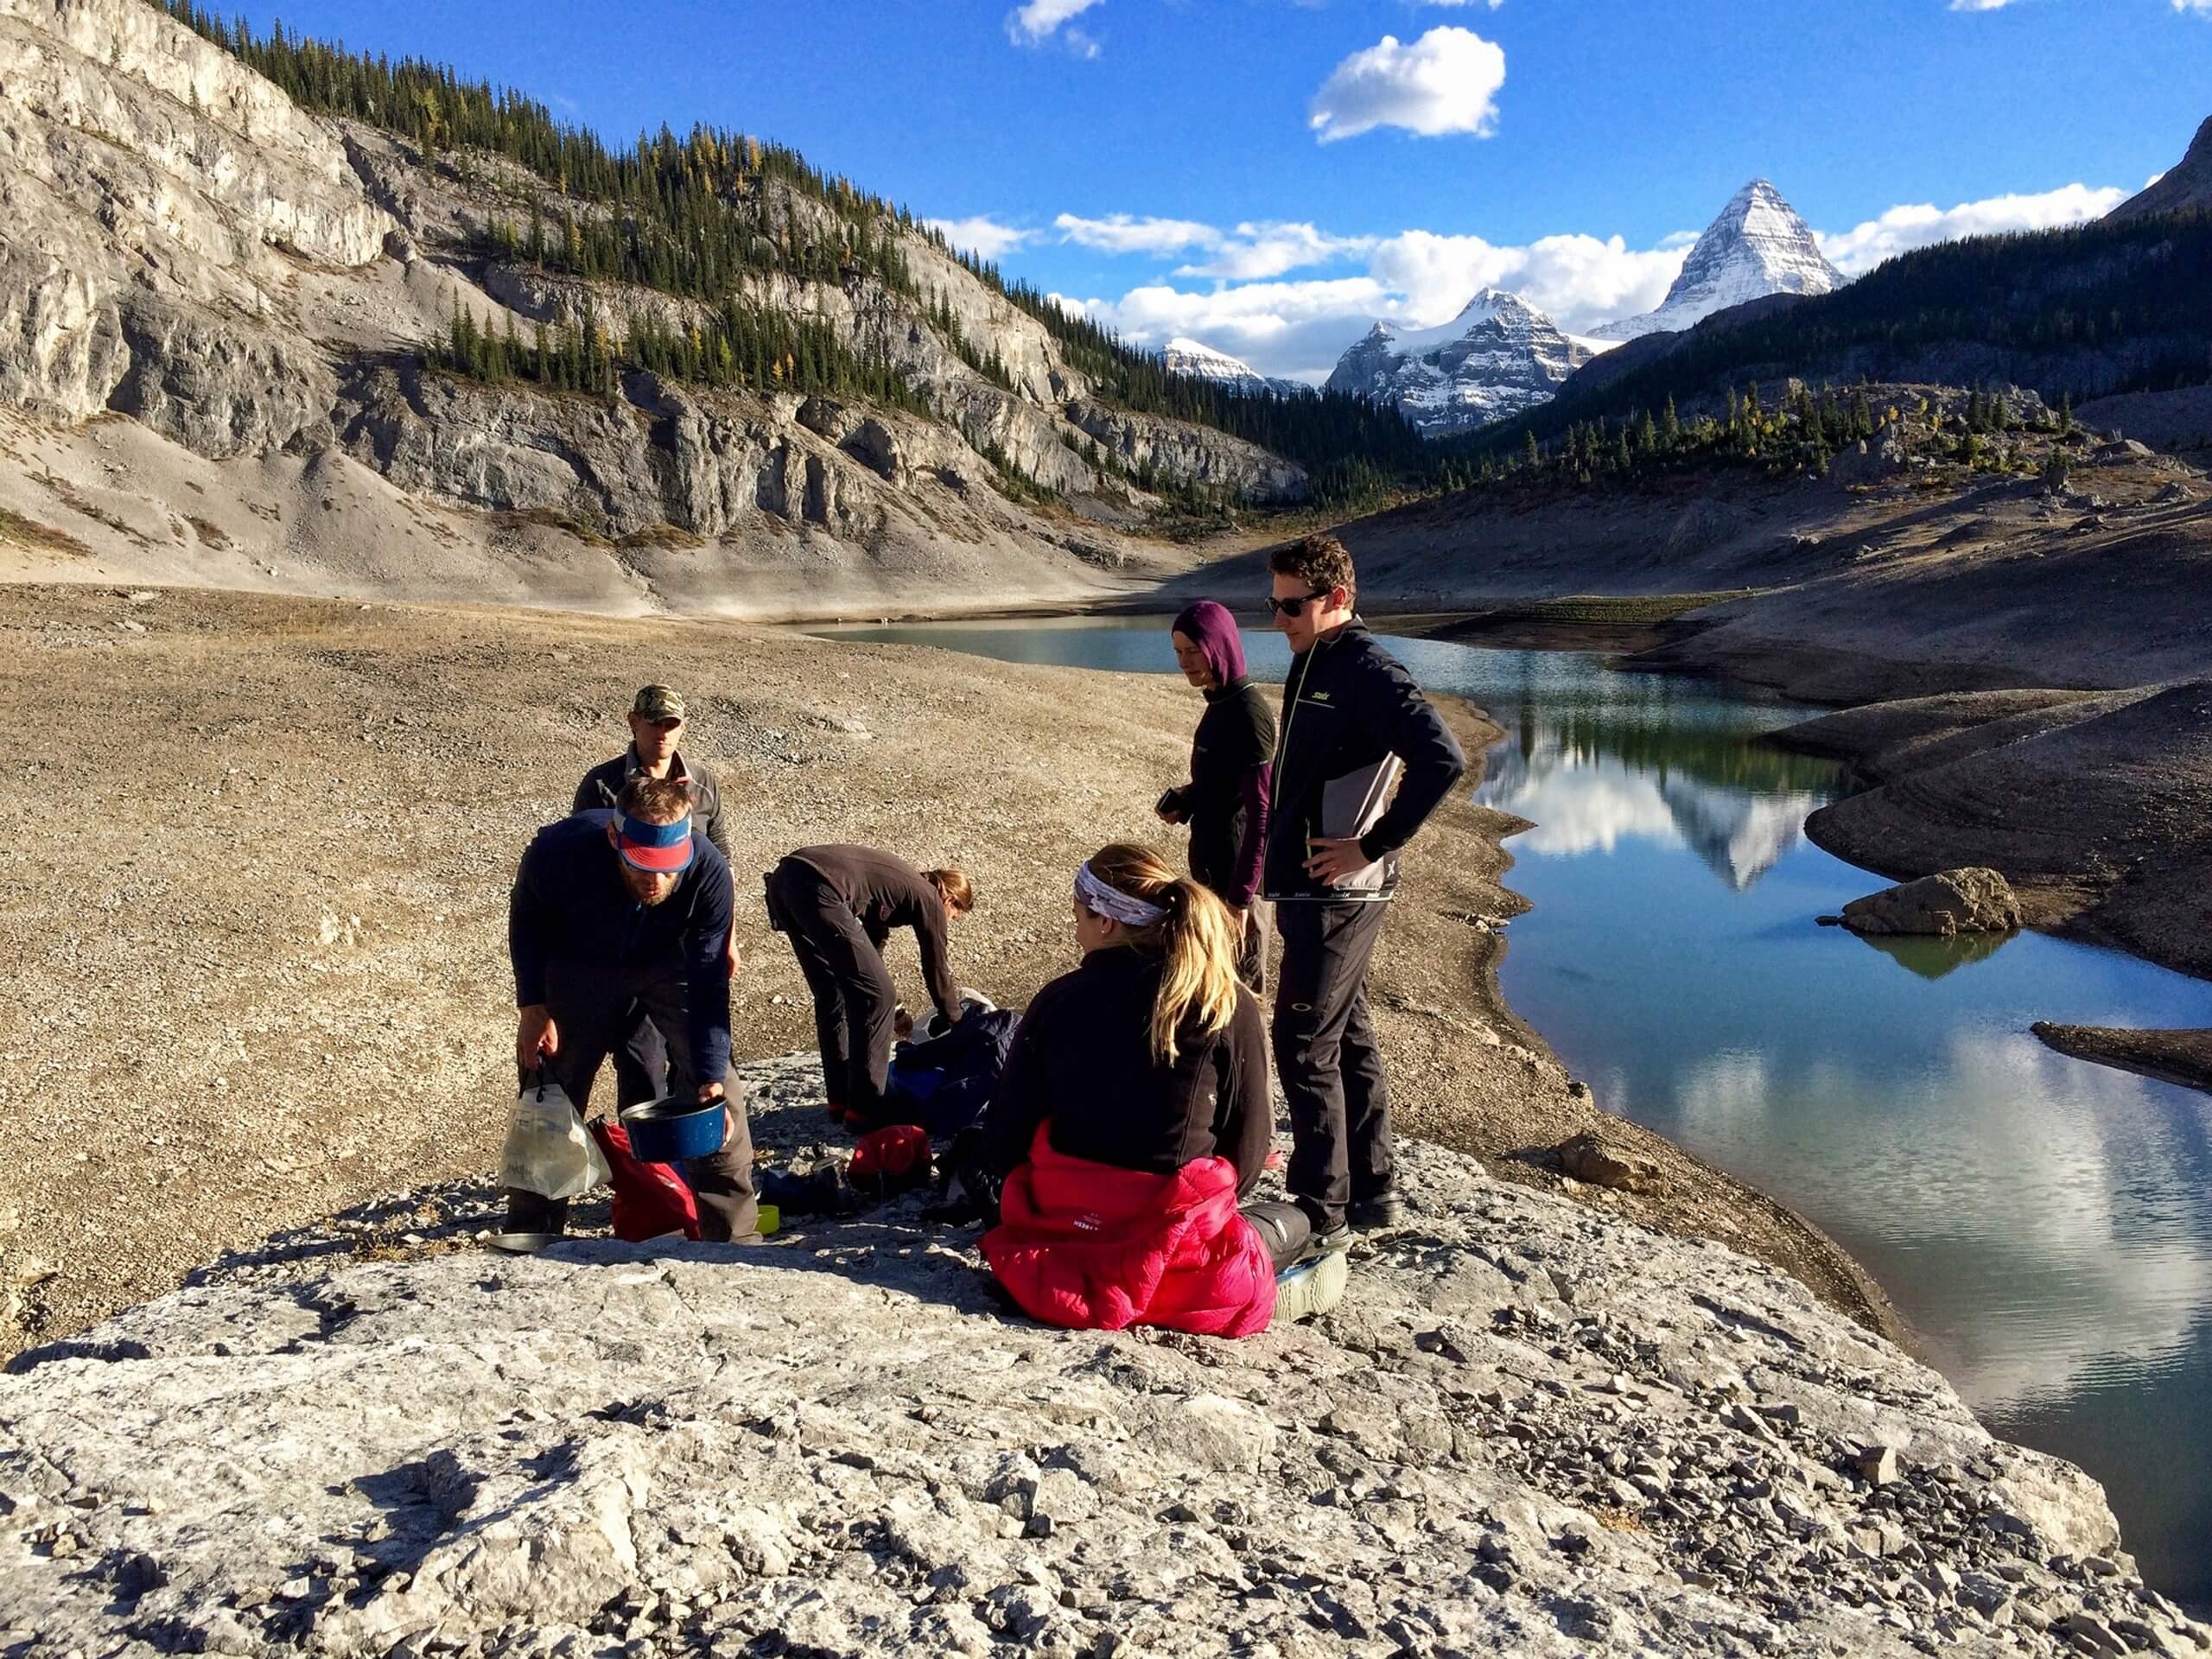 Group of hikers resting in Banff National Park